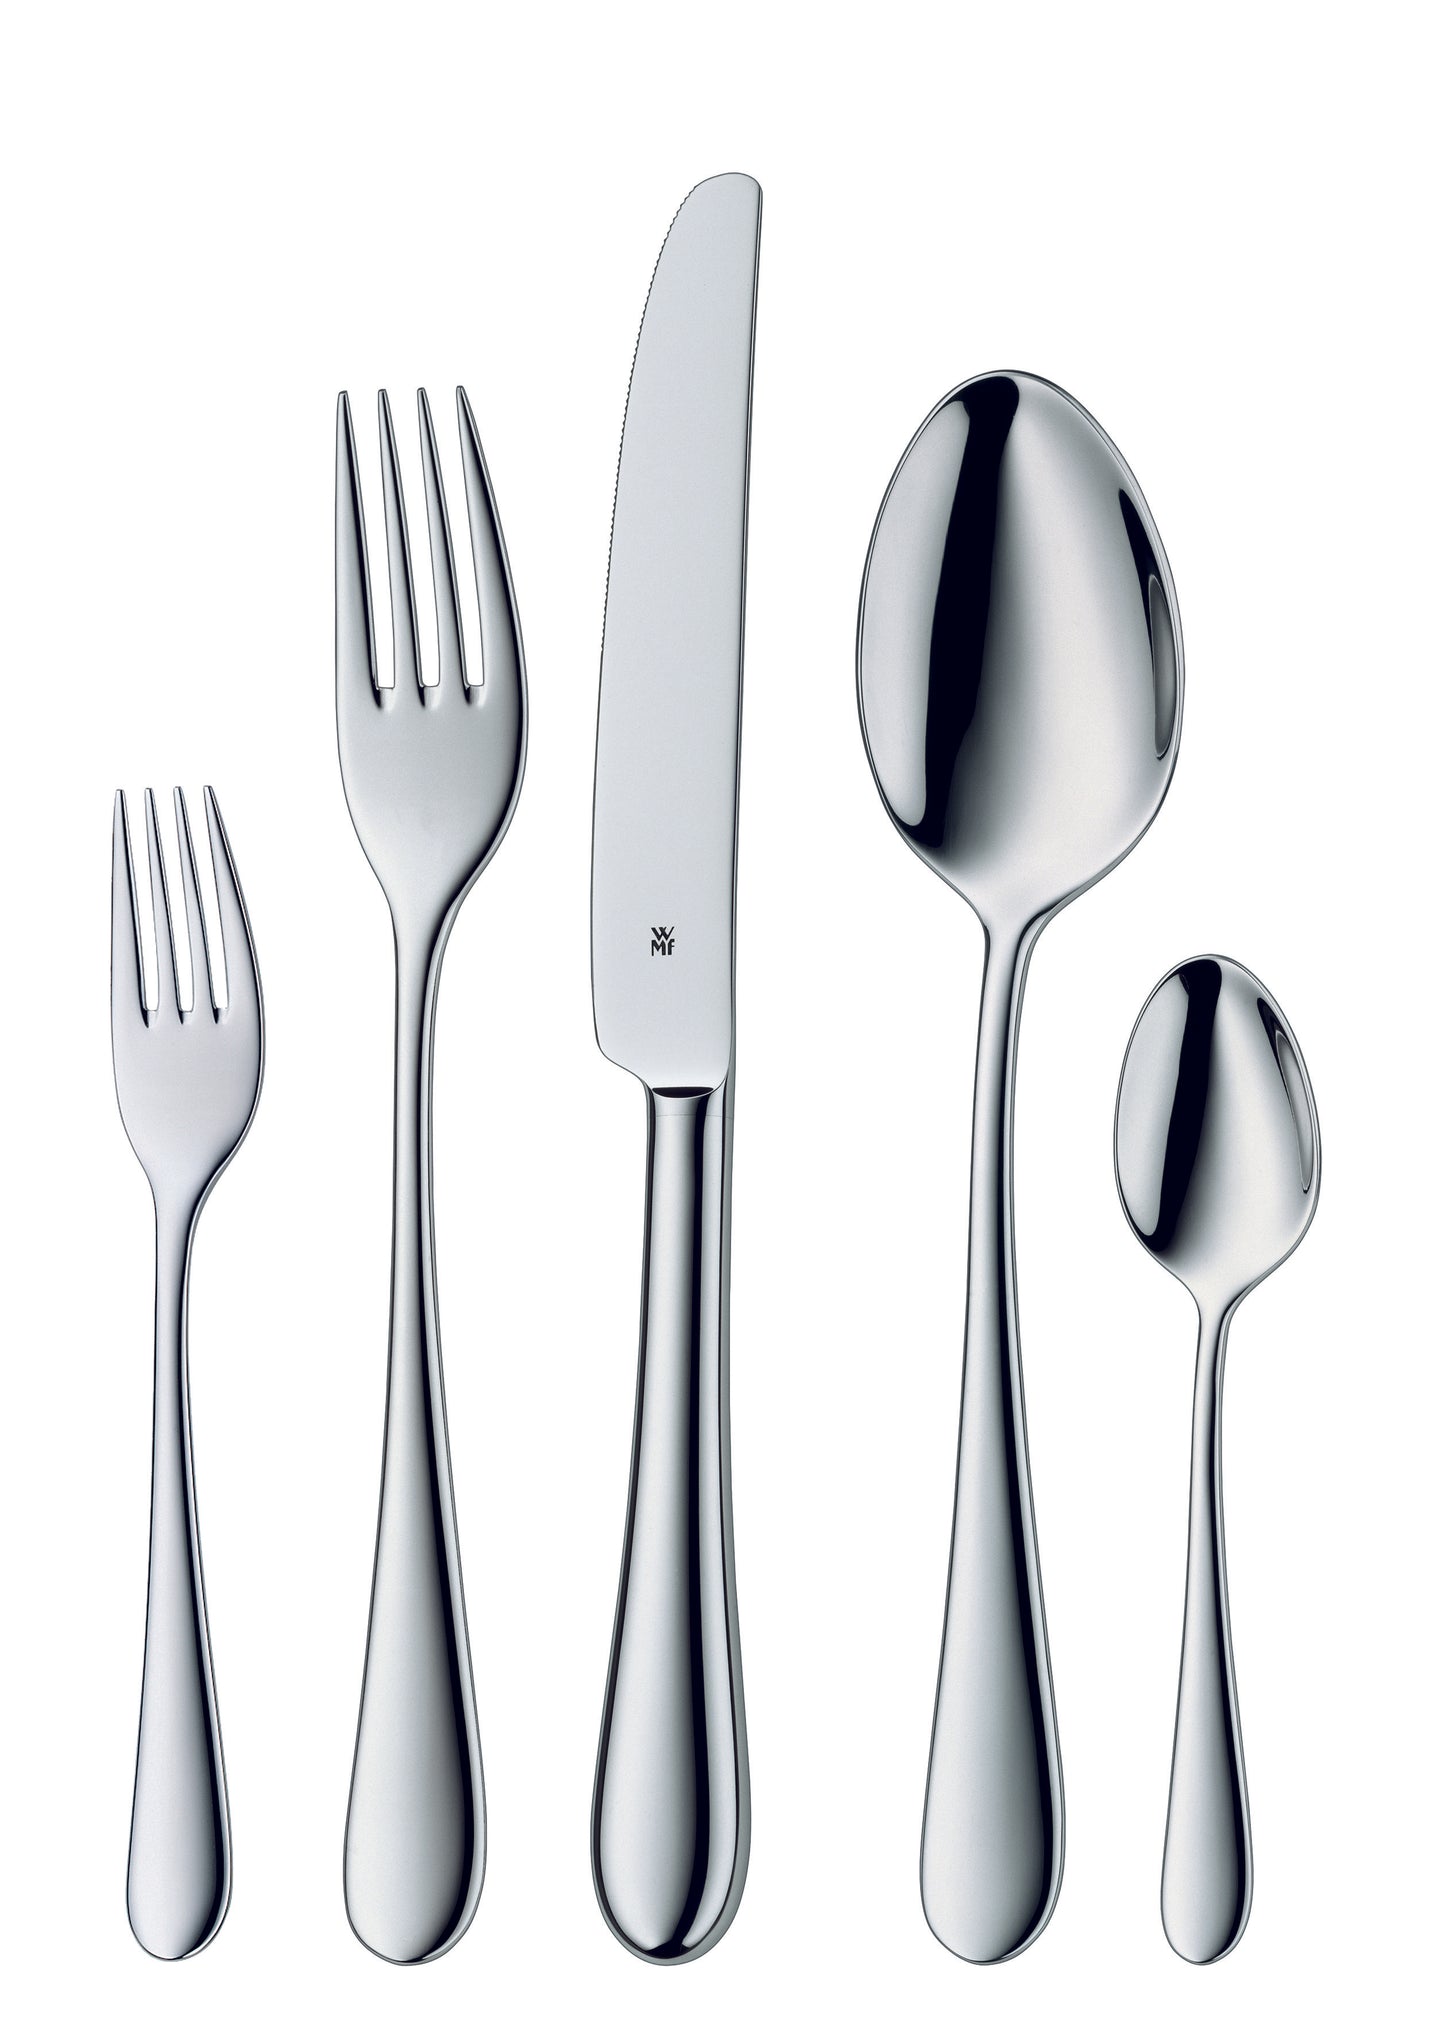 Gourmet spoon SIGNUM silver plated 190mm